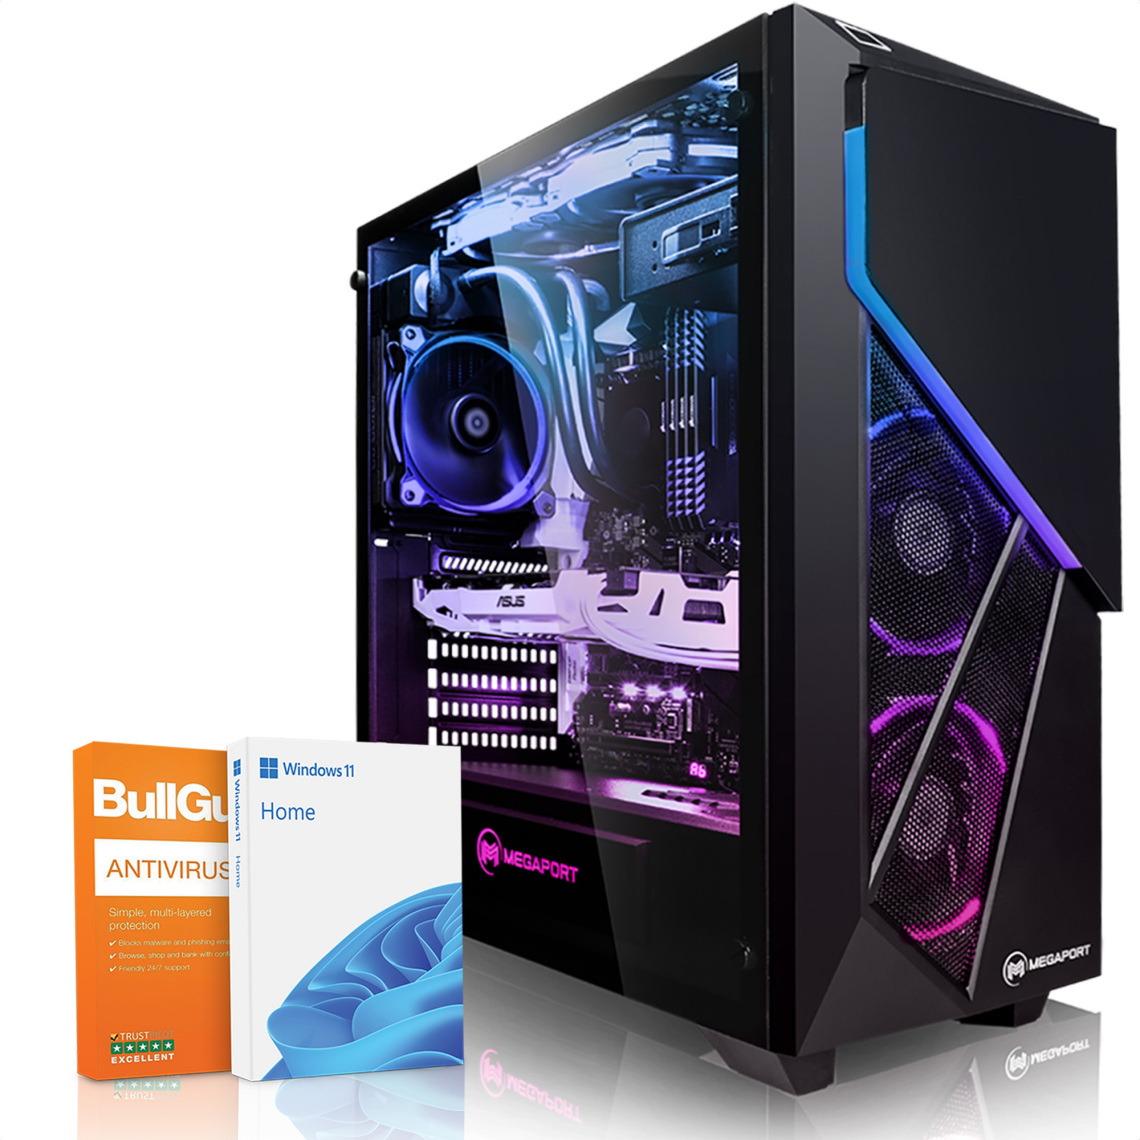 Megaport - High End PC Gamer • Intel Core i7-12700KF • RTX3060 Ti • 1To M.2 SSD • 2To HDD • 16Go 3200 • Windows 11 • WiFi • 701-FR - PC Fixe Gamer